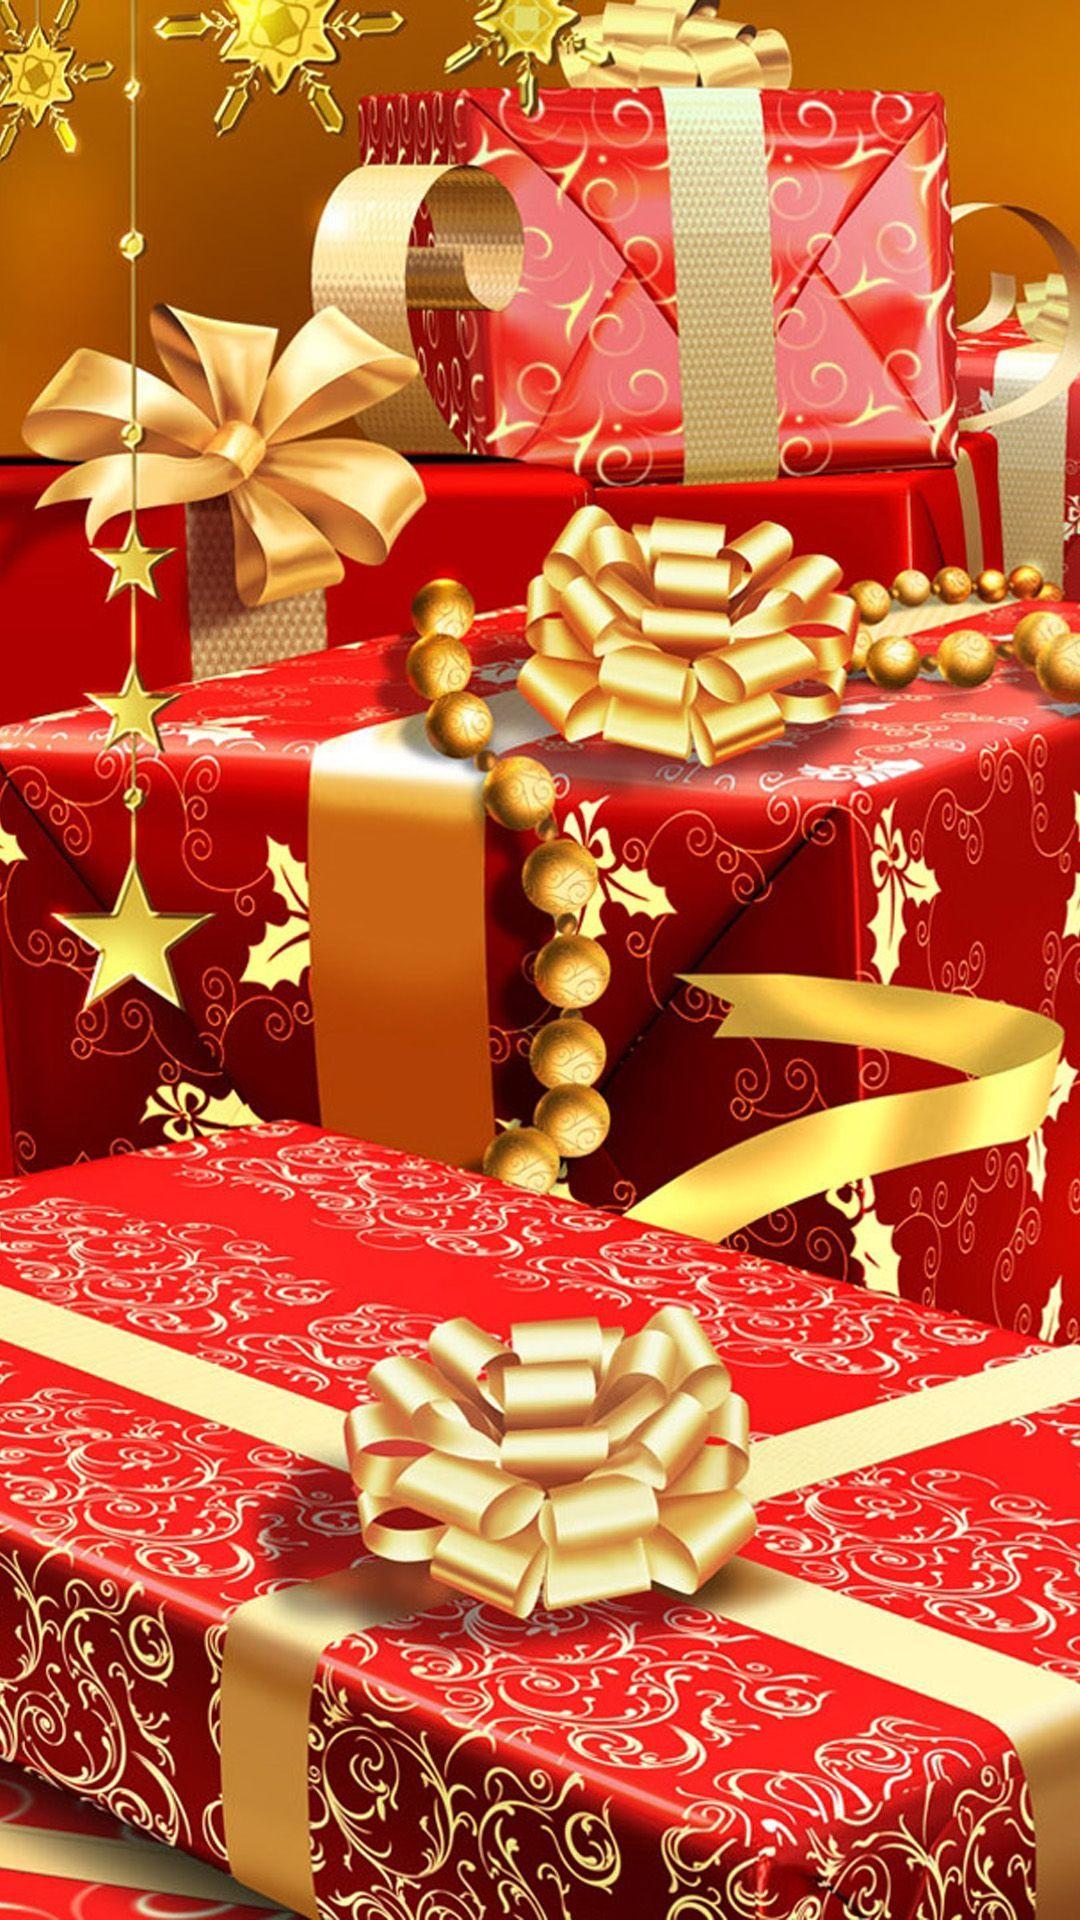 Rich Christmas Gifts iPhone 6 plus wallpaper. Wallpaper iphone christmas, Christmas wallpaper, Christmas wallpaper hd